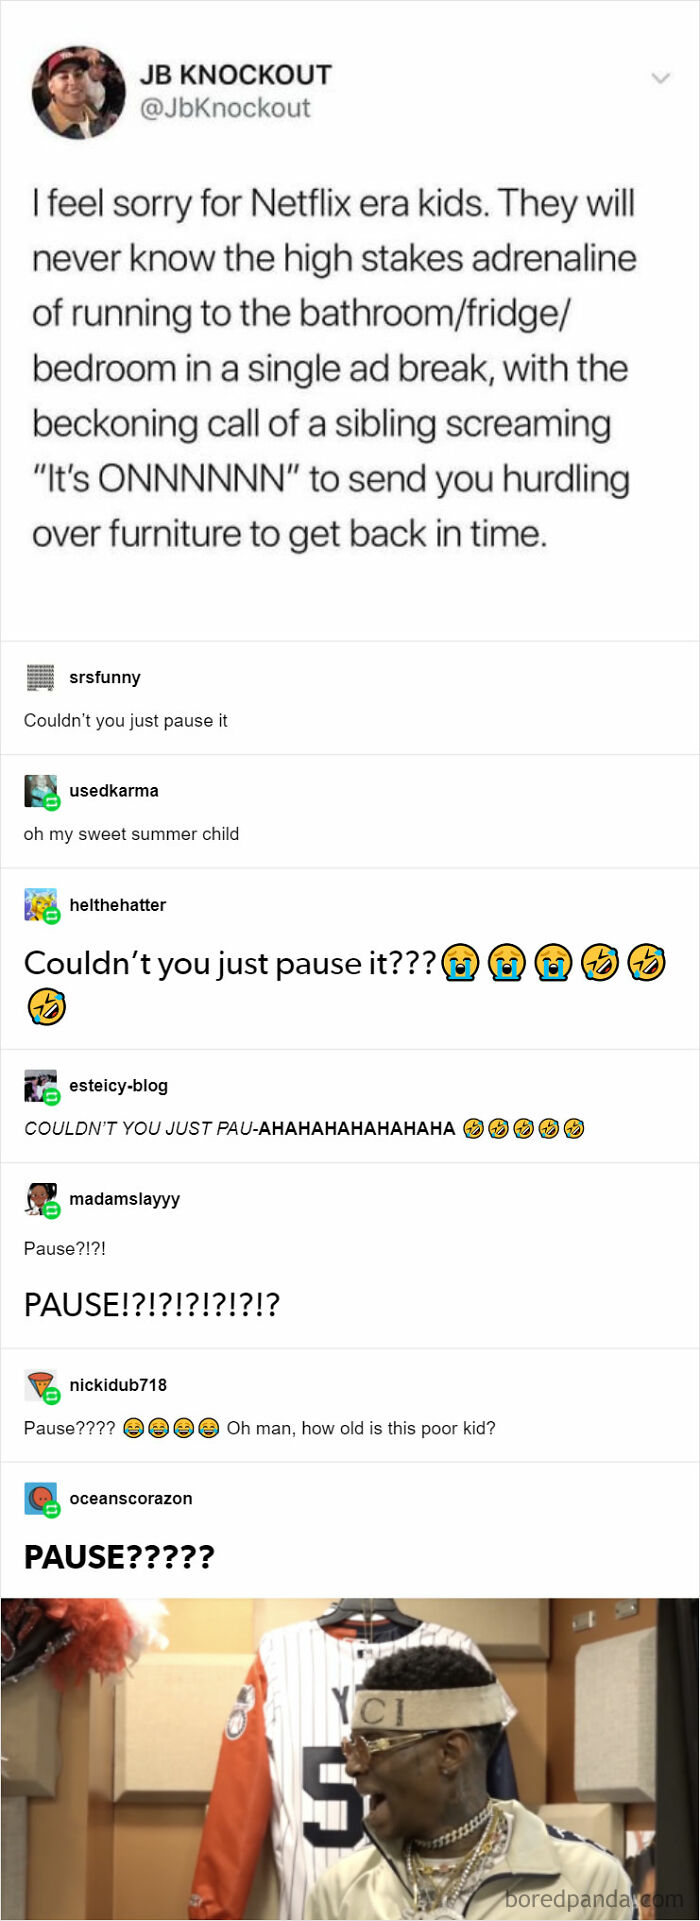 Just Pause Duh